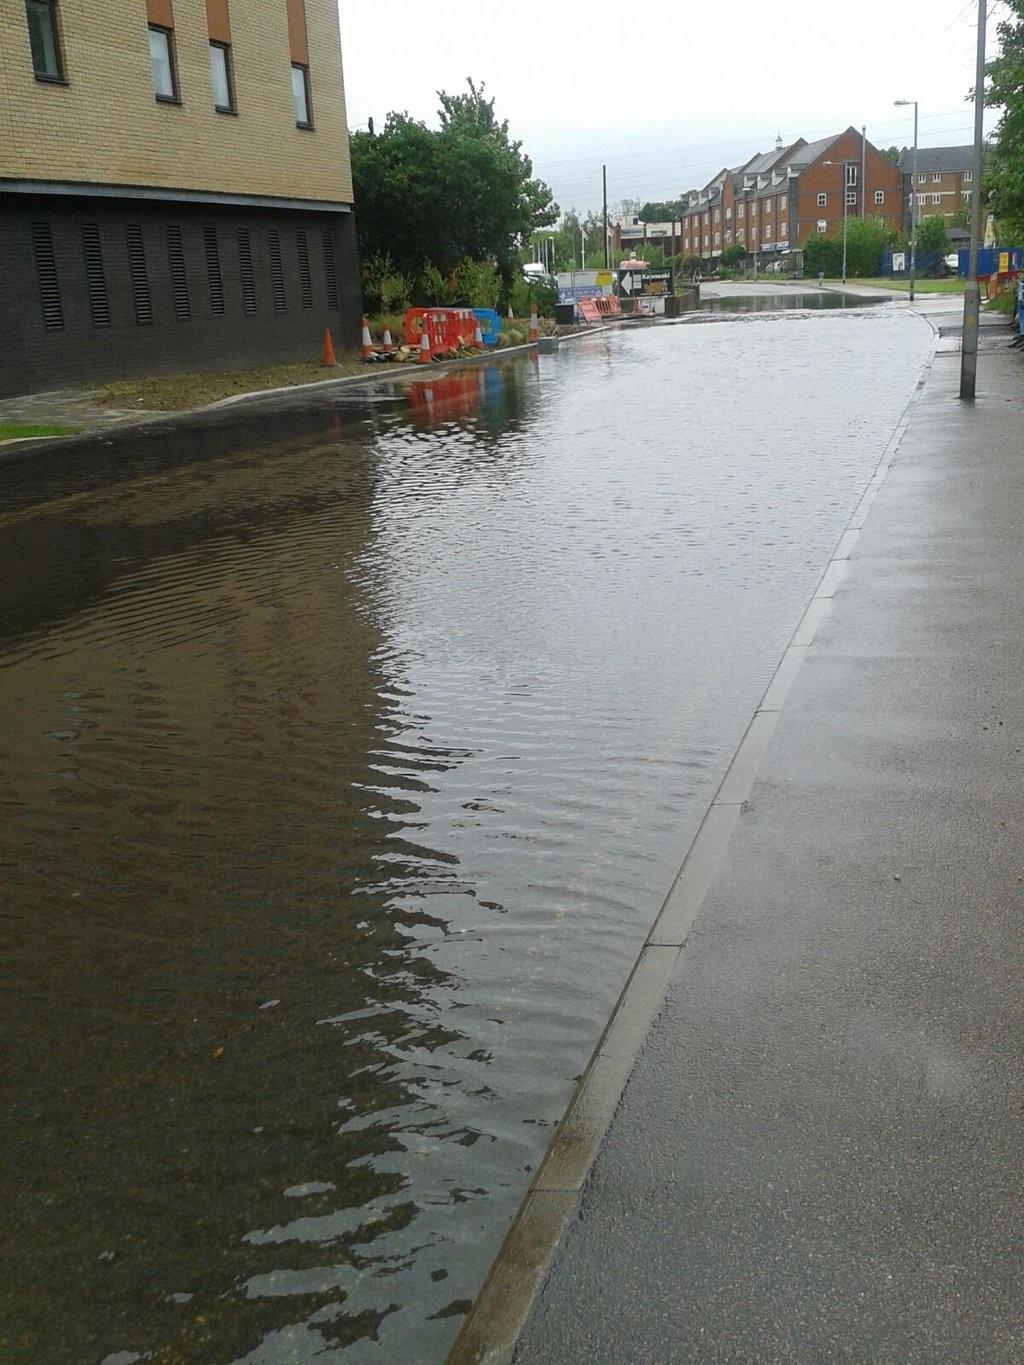 Jo Chisnall took this picture in Haven Road, which was closed off by police